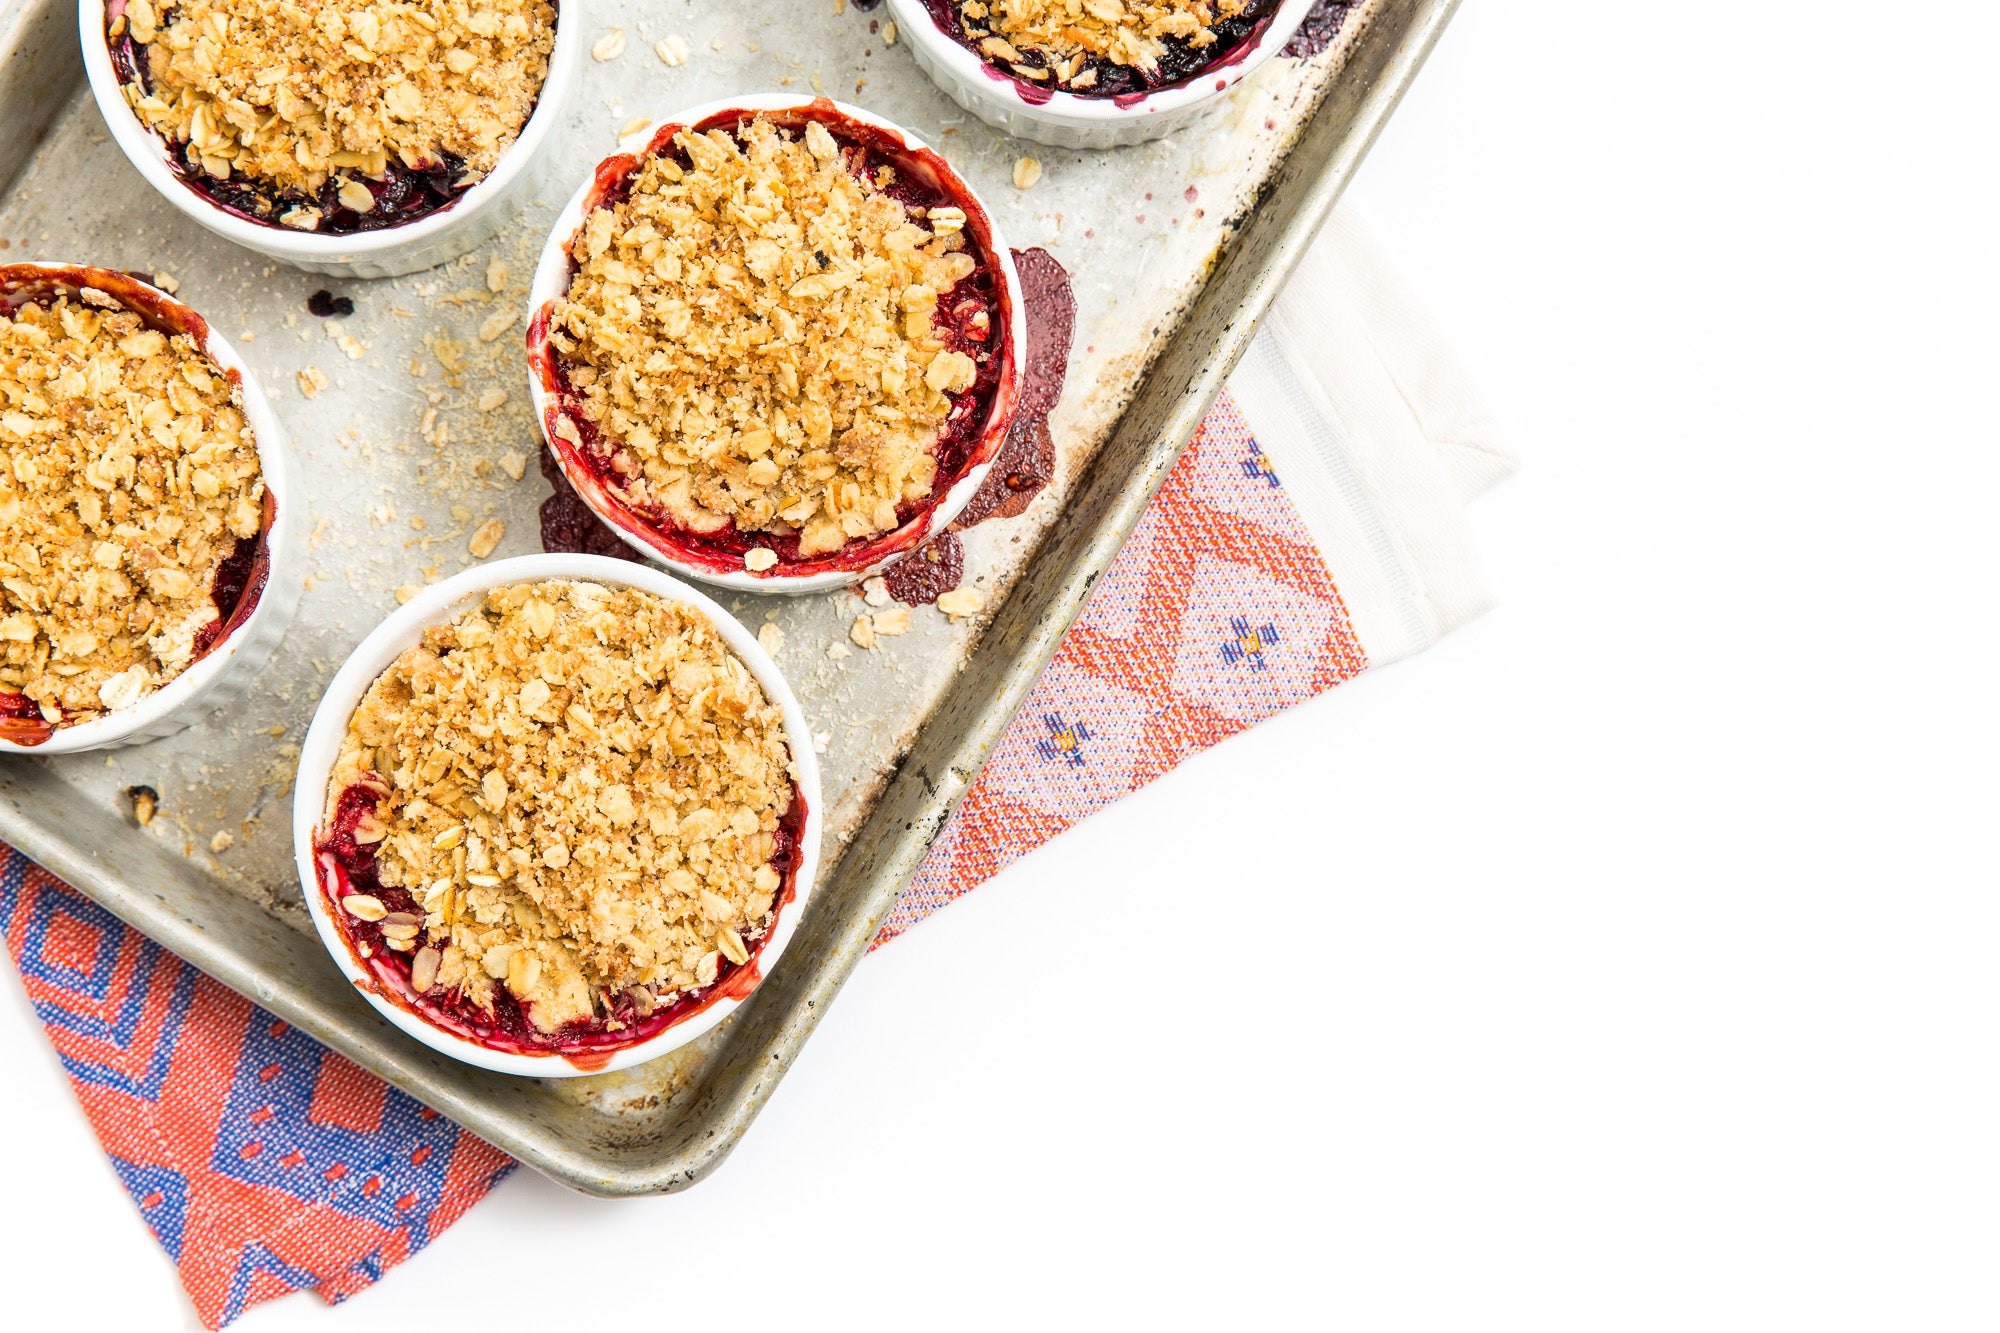 Image from above of Miss Jones Baking Co Mini Berry Crumbles in ramekins on a baking tray